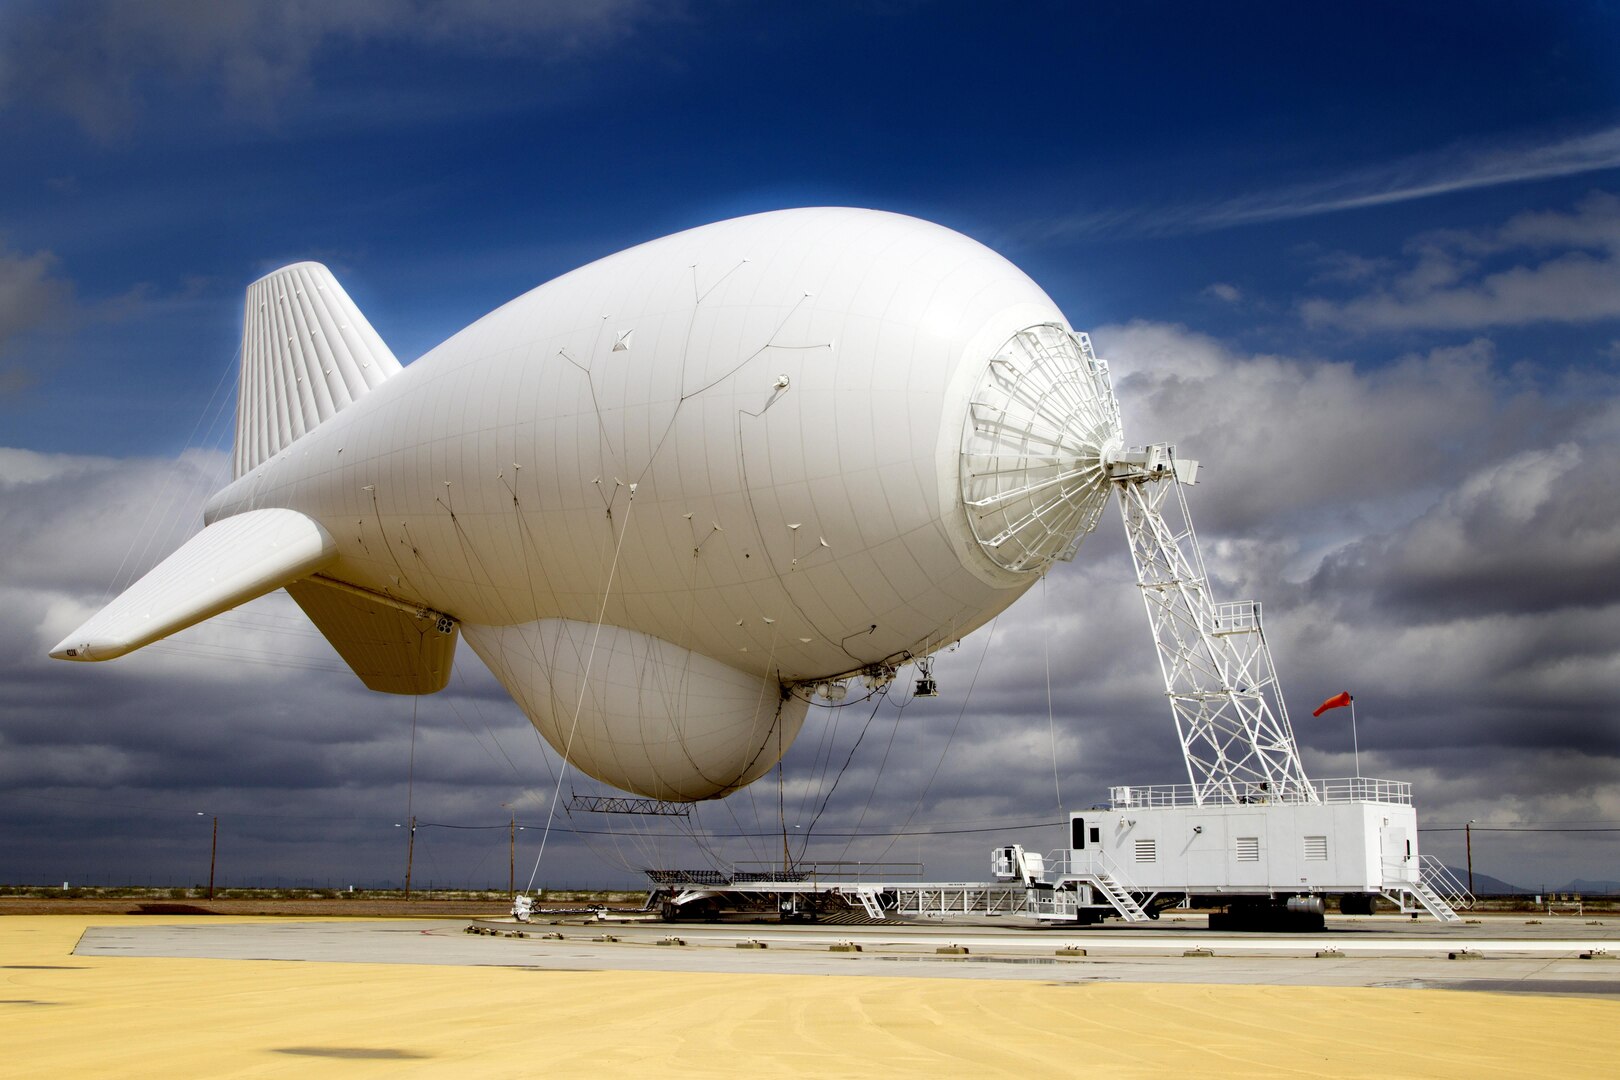 U.S. Customs and Border Protection, Office of Air and Marine, Tethered Aerostat Radar System (TARS) Deming New Mexico.
